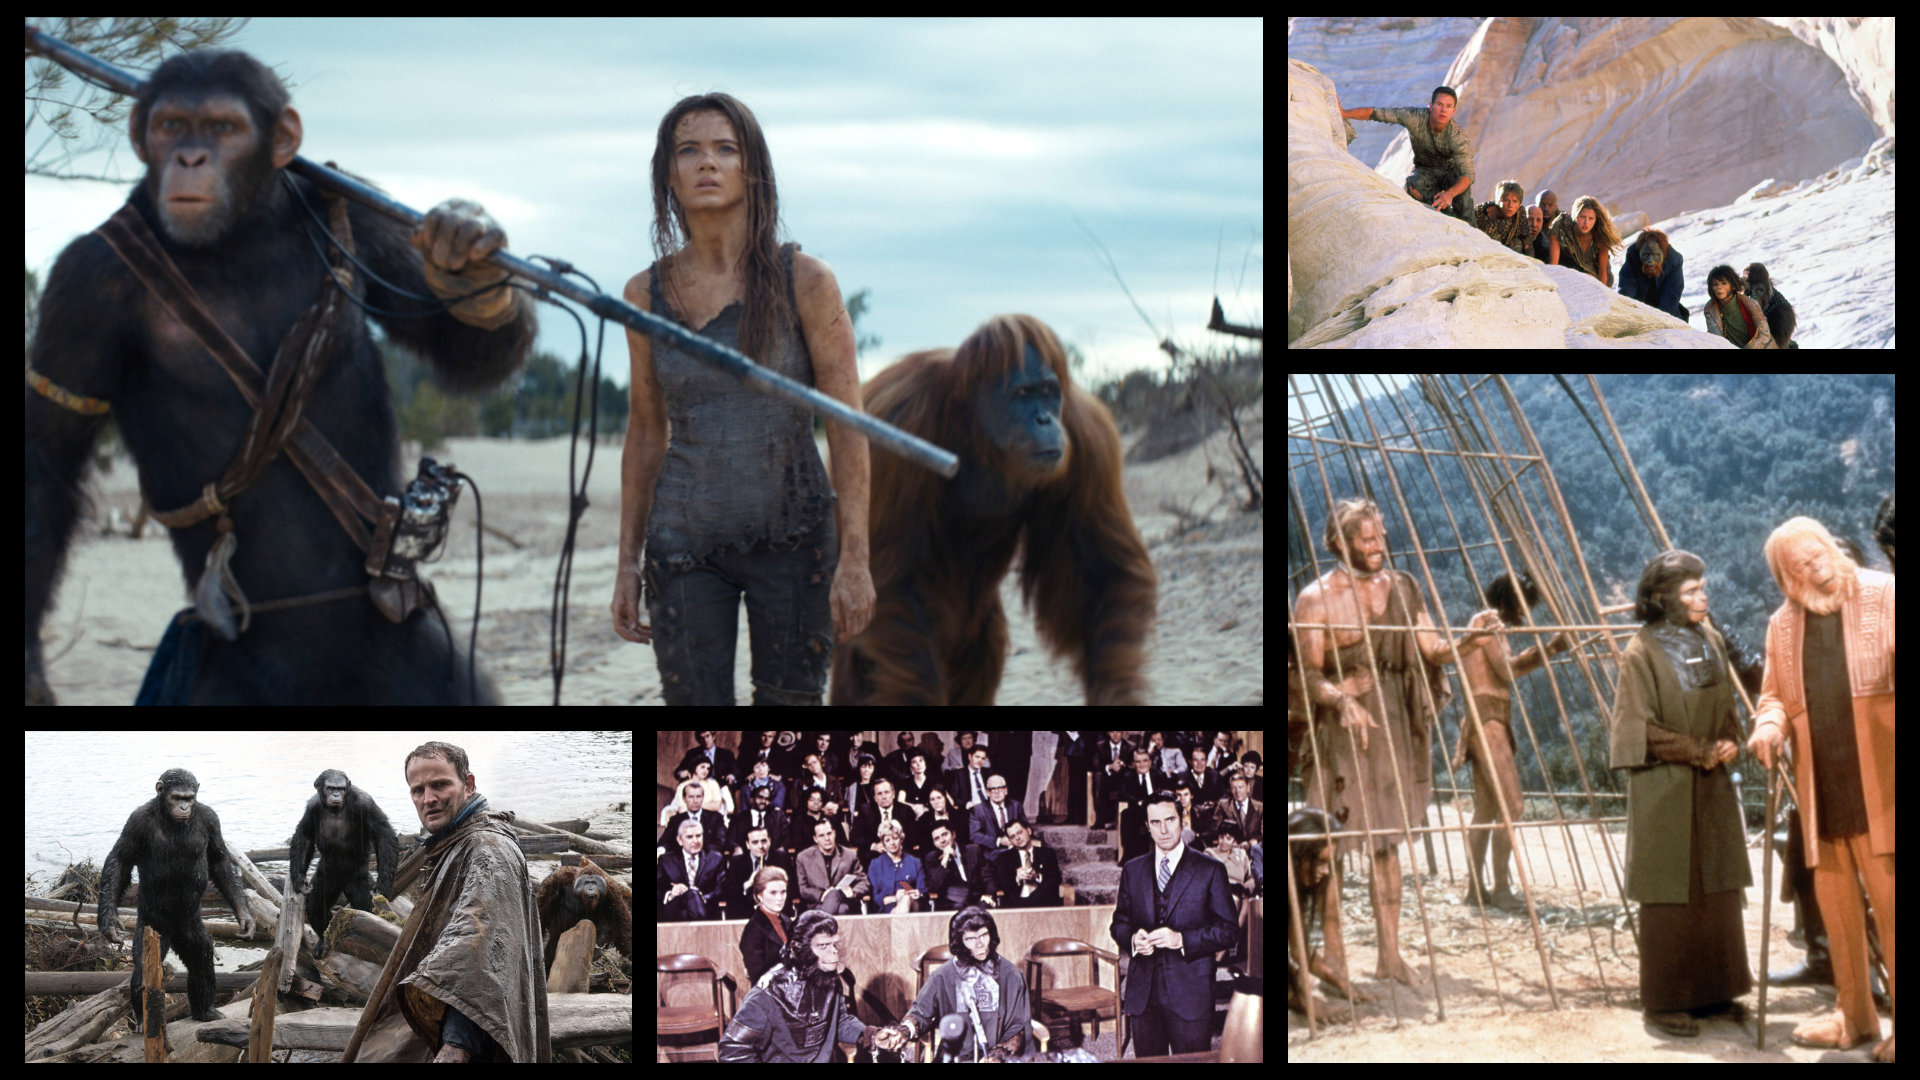 Every ‘Planet of the Apes’ Film Ranked, from the 1968 Original to ‘Kingdom’